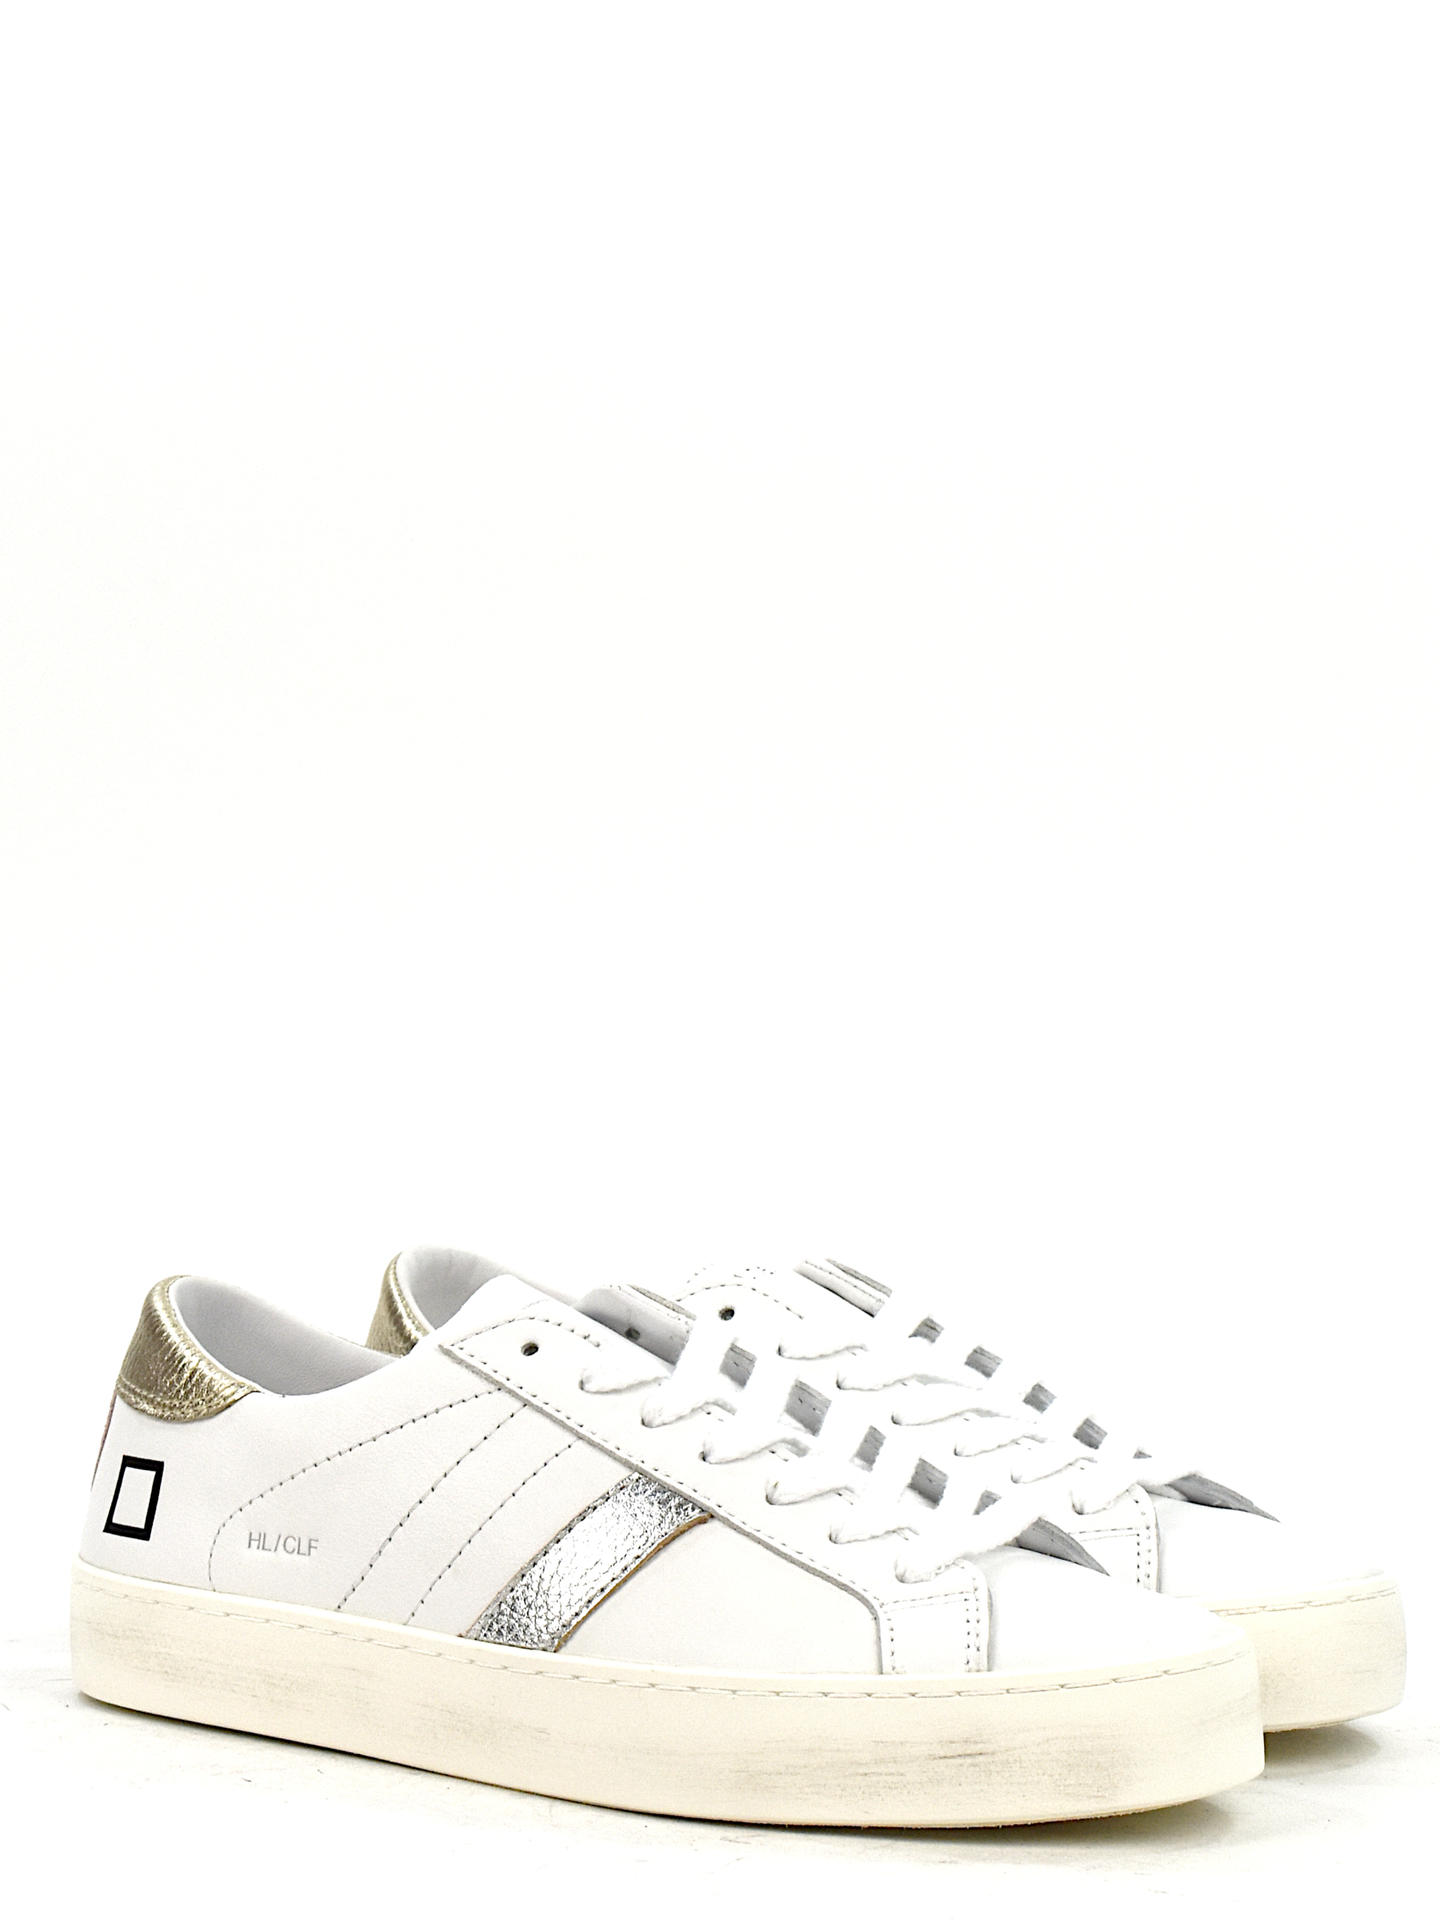 SNEAKERS D.A.T.E HLCAWM BIANCO